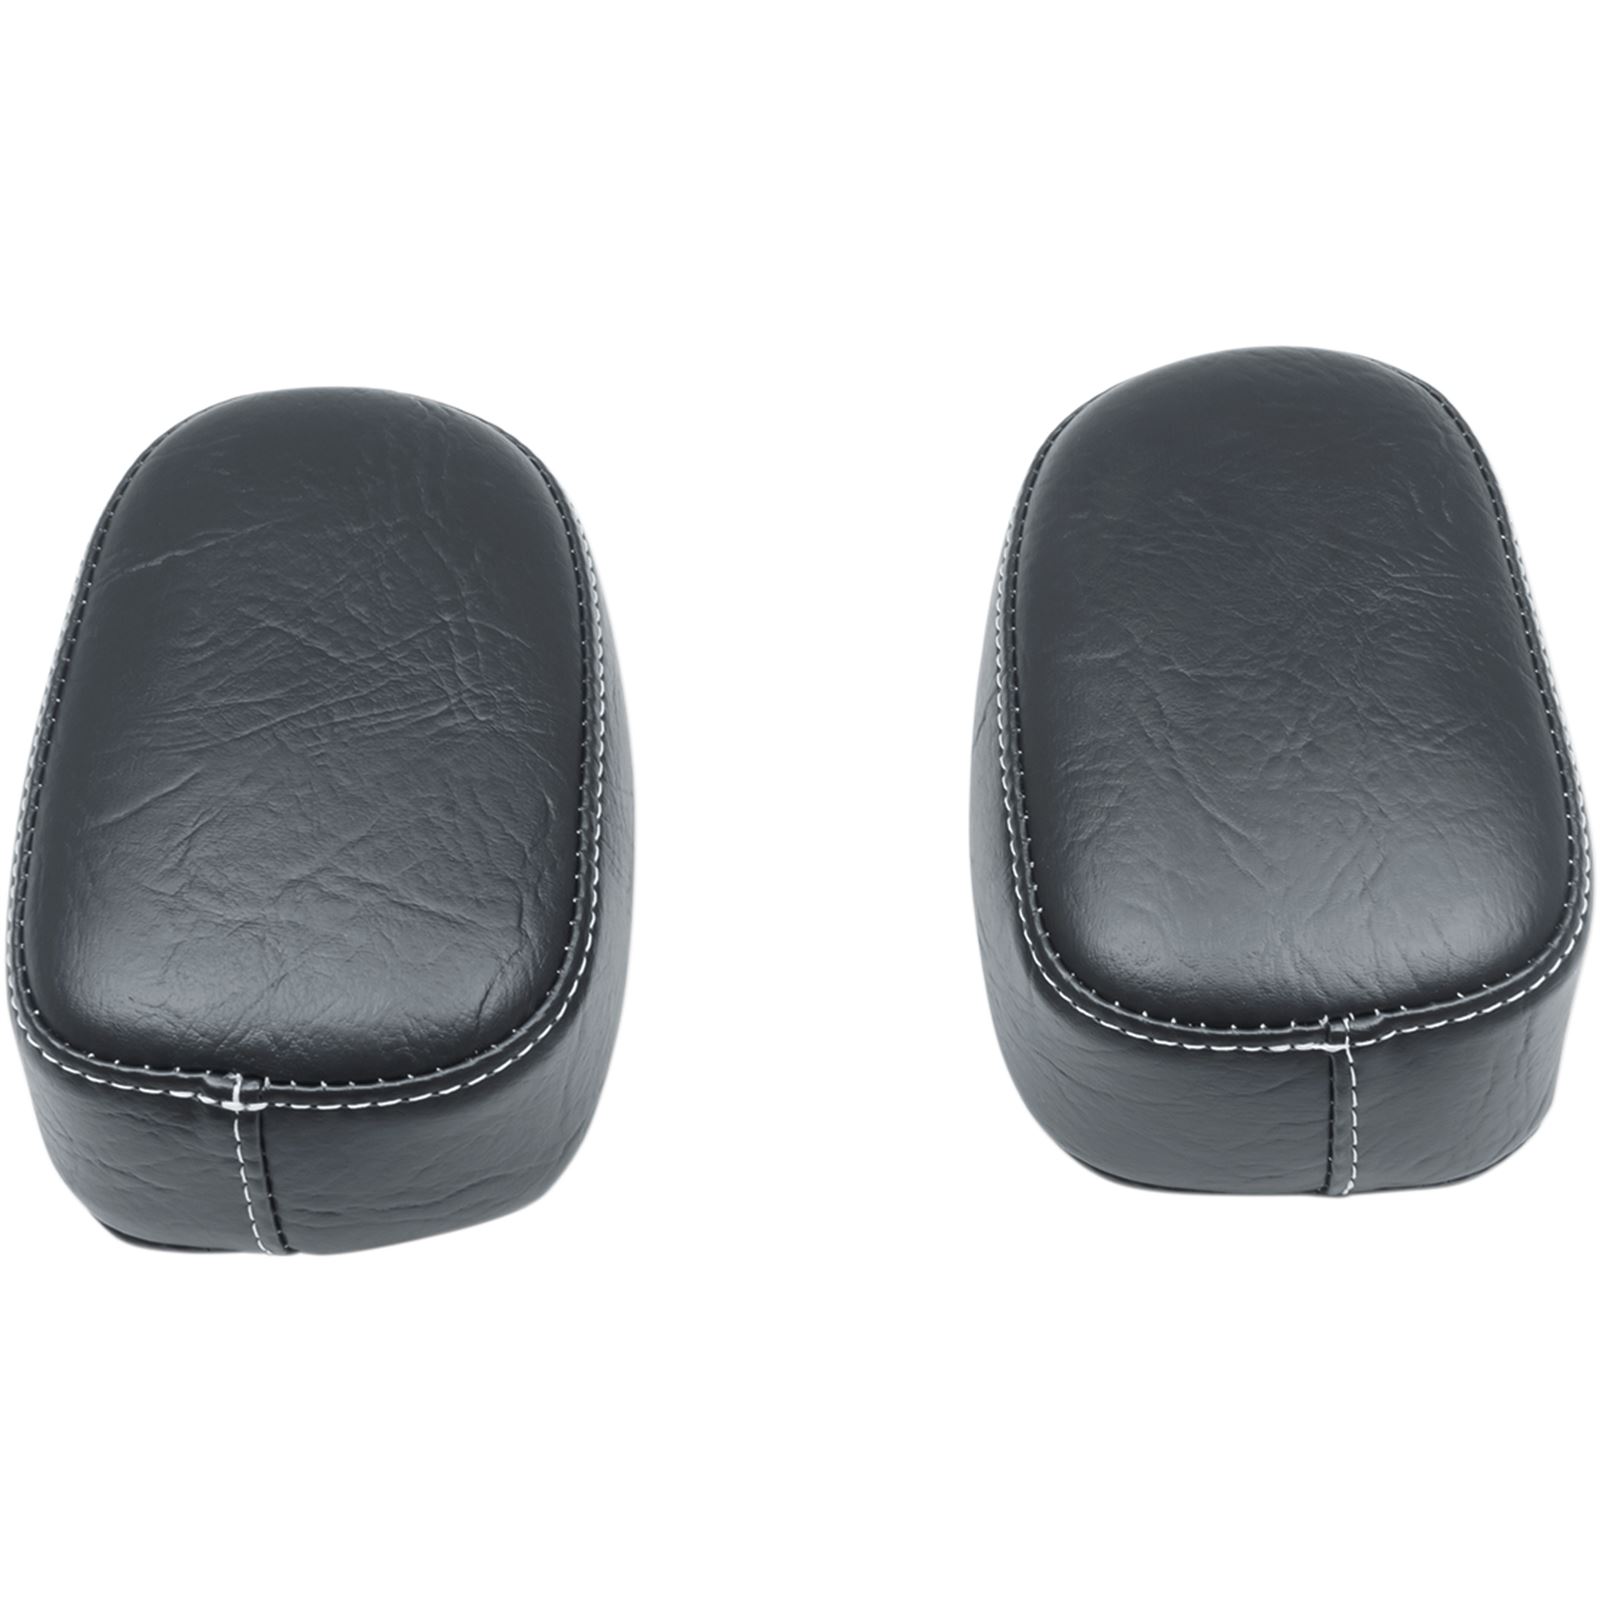 Mustang Motorcycle Products Armrest Pads - Roadmaster - White Thread